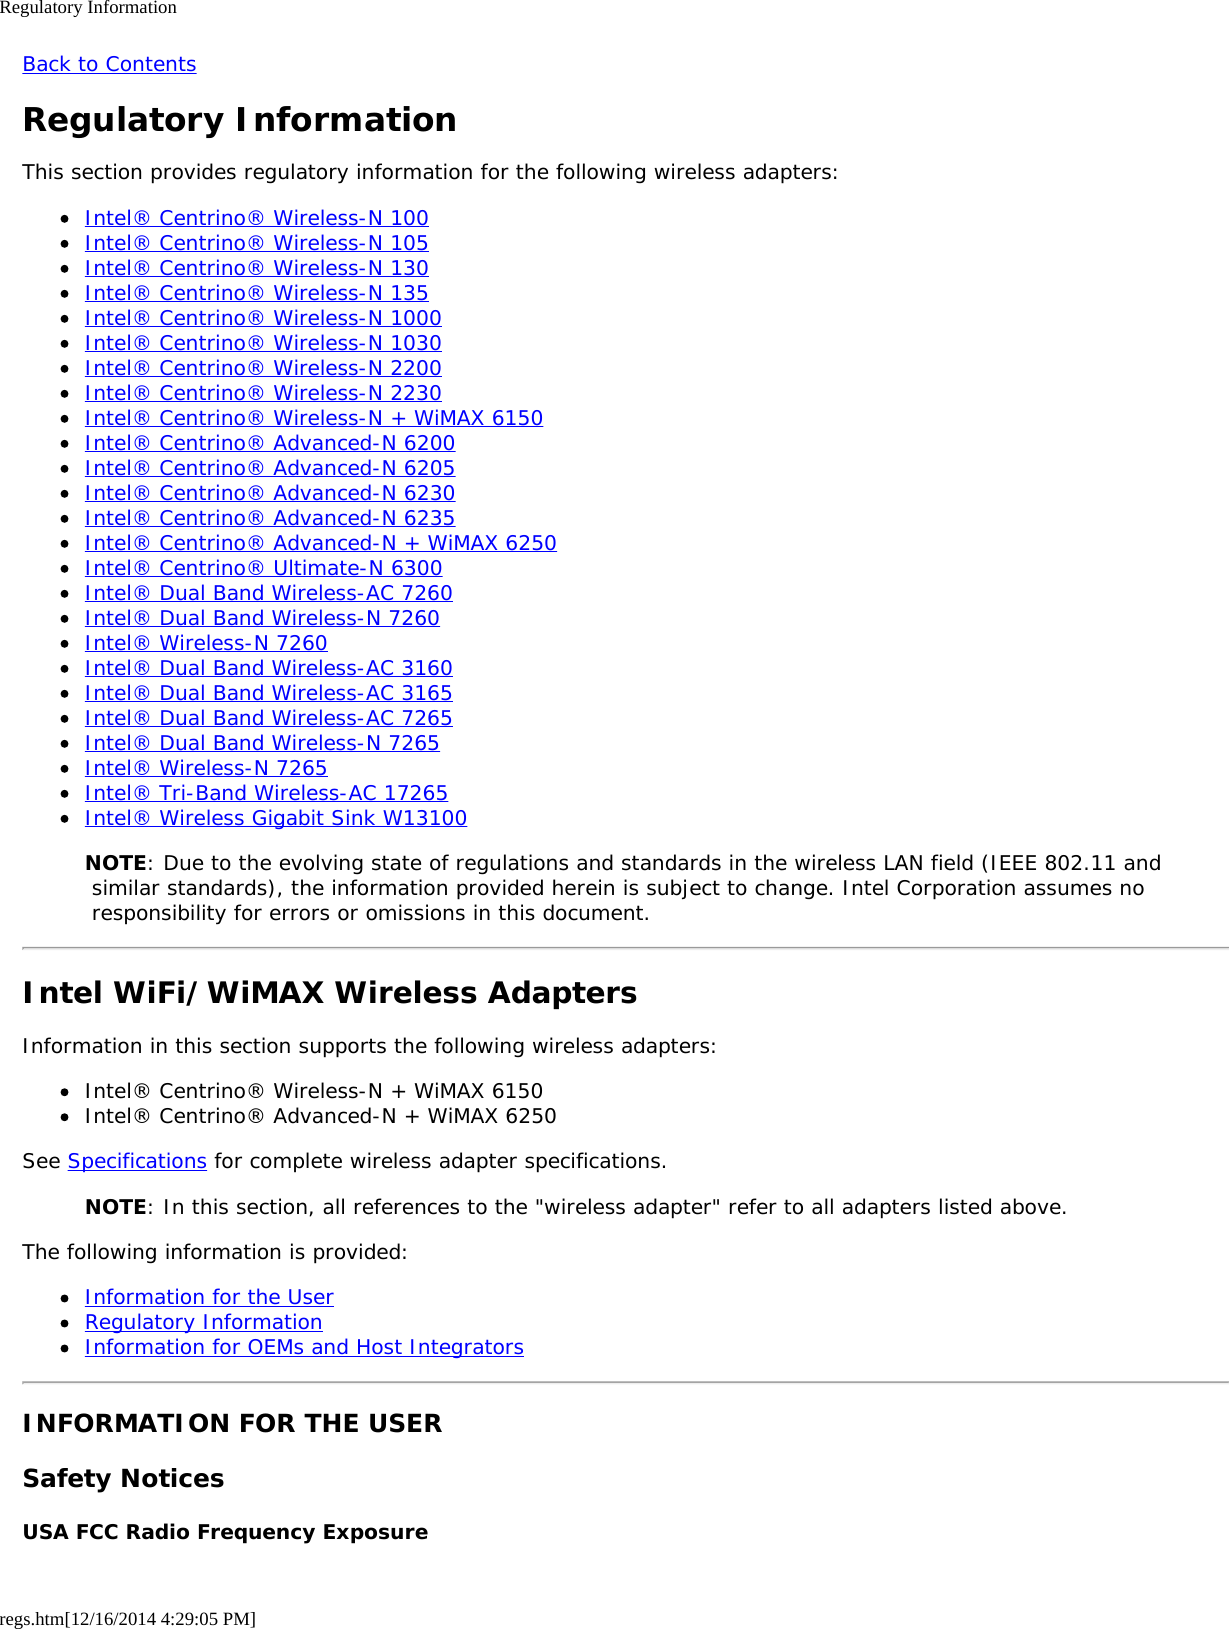 Regulatory Informationregs.htm[12/16/2014 4:29:05 PM]Back to ContentsRegulatory InformationThis section provides regulatory information for the following wireless adapters:Intel® Centrino® Wireless-N 100Intel® Centrino® Wireless-N 105Intel® Centrino® Wireless-N 130Intel® Centrino® Wireless-N 135Intel® Centrino® Wireless-N 1000Intel® Centrino® Wireless-N 1030Intel® Centrino® Wireless-N 2200Intel® Centrino® Wireless-N 2230Intel® Centrino® Wireless-N + WiMAX 6150Intel® Centrino® Advanced-N 6200Intel® Centrino® Advanced-N 6205Intel® Centrino® Advanced-N 6230Intel® Centrino® Advanced-N 6235Intel® Centrino® Advanced-N + WiMAX 6250Intel® Centrino® Ultimate-N 6300Intel® Dual Band Wireless-AC 7260Intel® Dual Band Wireless-N 7260Intel® Wireless-N 7260Intel® Dual Band Wireless-AC 3160Intel® Dual Band Wireless-AC 3165Intel® Dual Band Wireless-AC 7265Intel® Dual Band Wireless-N 7265Intel® Wireless-N 7265Intel® Tri-Band Wireless-AC 17265Intel® Wireless Gigabit Sink W13100NOTE: Due to the evolving state of regulations and standards in the wireless LAN field (IEEE 802.11 and similar standards), the information provided herein is subject to change. Intel Corporation assumes no responsibility for errors or omissions in this document.Intel WiFi/WiMAX Wireless AdaptersInformation in this section supports the following wireless adapters:Intel® Centrino® Wireless-N + WiMAX 6150Intel® Centrino® Advanced-N + WiMAX 6250See Specifications for complete wireless adapter specifications.NOTE: In this section, all references to the &quot;wireless adapter&quot; refer to all adapters listed above.The following information is provided:Information for the UserRegulatory InformationInformation for OEMs and Host IntegratorsINFORMATION FOR THE USERSafety NoticesUSA FCC Radio Frequency Exposure